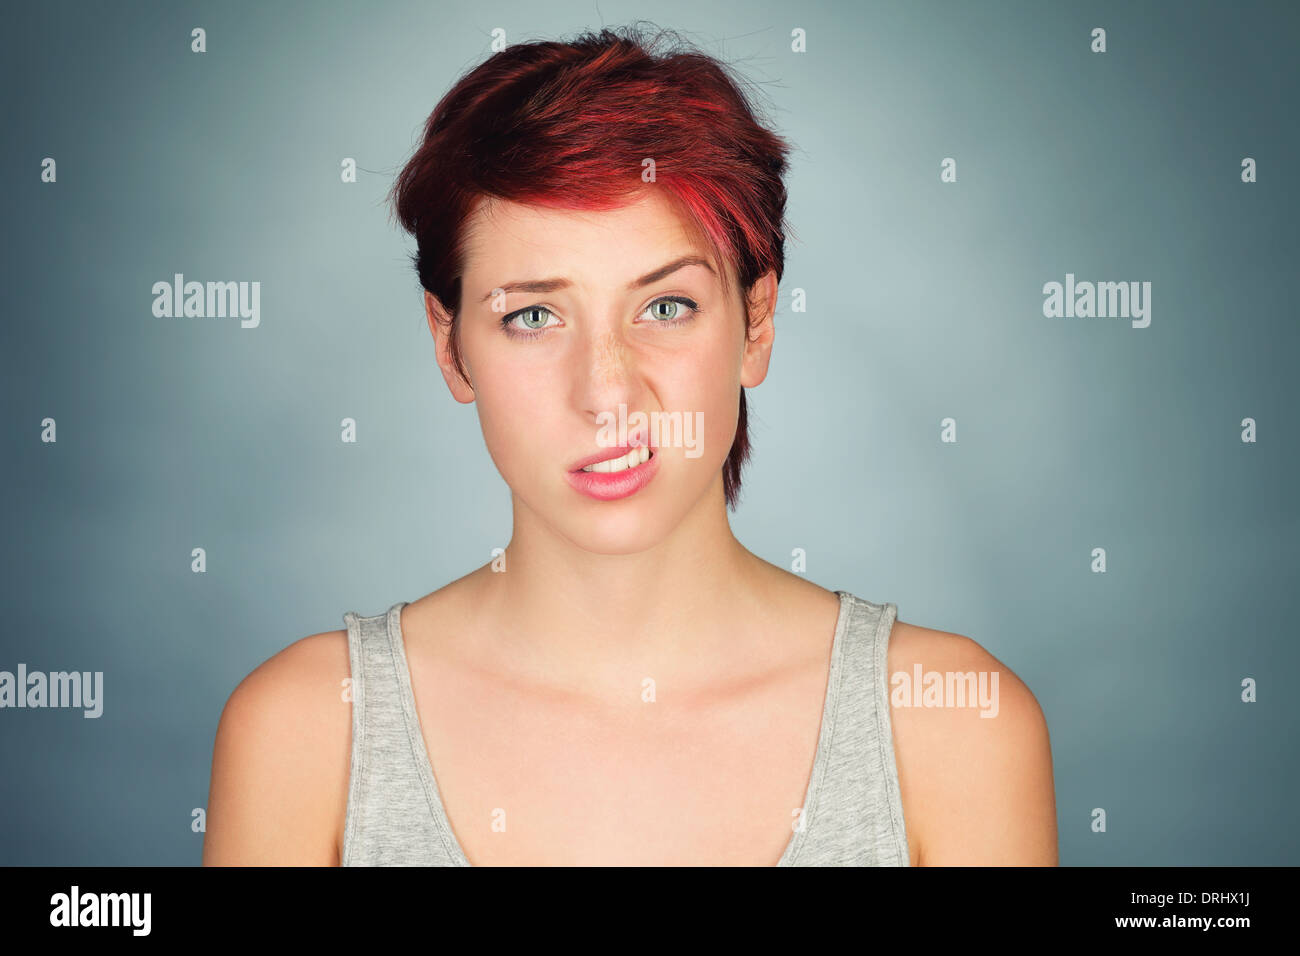 young redhead woman lifting one side of her lip and eyebrow Stock Photo